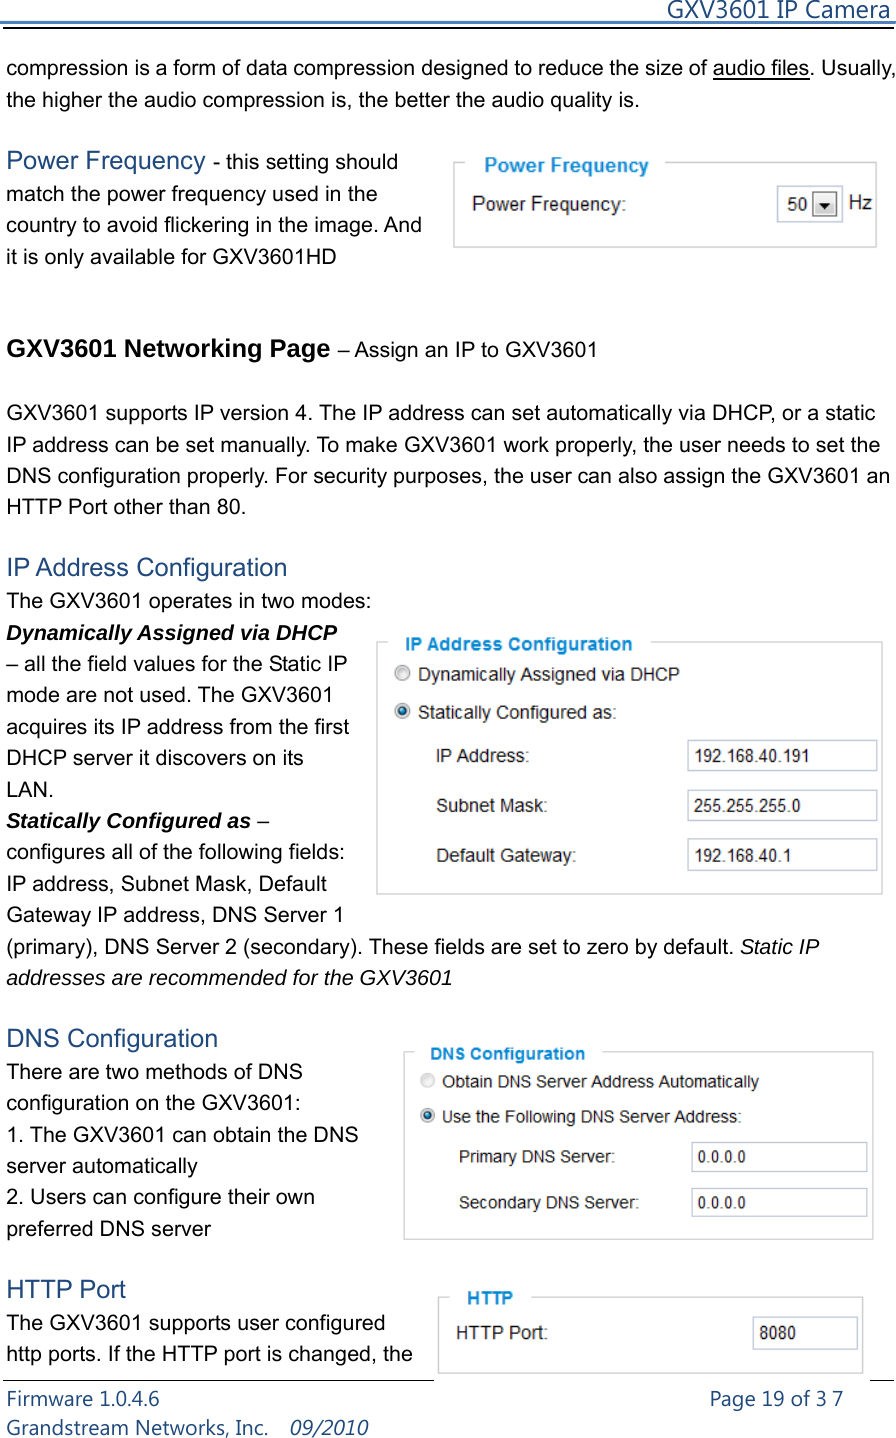     GXV3601 IP Camera Firmware 1.0.4.6                                                   Page 19 of 37     Grandstream Networks, Inc.  09/2010  compression is a form of data compression designed to reduce the size of audio files. Usually, the higher the audio compression is, the better the audio quality is.  Power Frequency - this setting should match the power frequency used in the country to avoid flickering in the image. And it is only available for GXV3601HD   GXV3601 Networking Page – Assign an IP to GXV3601  GXV3601 supports IP version 4. The IP address can set automatically via DHCP, or a static IP address can be set manually. To make GXV3601 work properly, the user needs to set the DNS configuration properly. For security purposes, the user can also assign the GXV3601 an HTTP Port other than 80.  IP Address Configuration The GXV3601 operates in two modes: Dynamically Assigned via DHCP – all the field values for the Static IP mode are not used. The GXV3601 acquires its IP address from the first DHCP server it discovers on its LAN.  Statically Configured as – configures all of the following fields: IP address, Subnet Mask, Default Gateway IP address, DNS Server 1 (primary), DNS Server 2 (secondary). These fields are set to zero by default. Static IP addresses are recommended for the GXV3601  DNS Configuration   There are two methods of DNS configuration on the GXV3601: 1. The GXV3601 can obtain the DNS server automatically 2. Users can configure their own preferred DNS server  HTTP Port   The GXV3601 supports user configured http ports. If the HTTP port is changed, the 